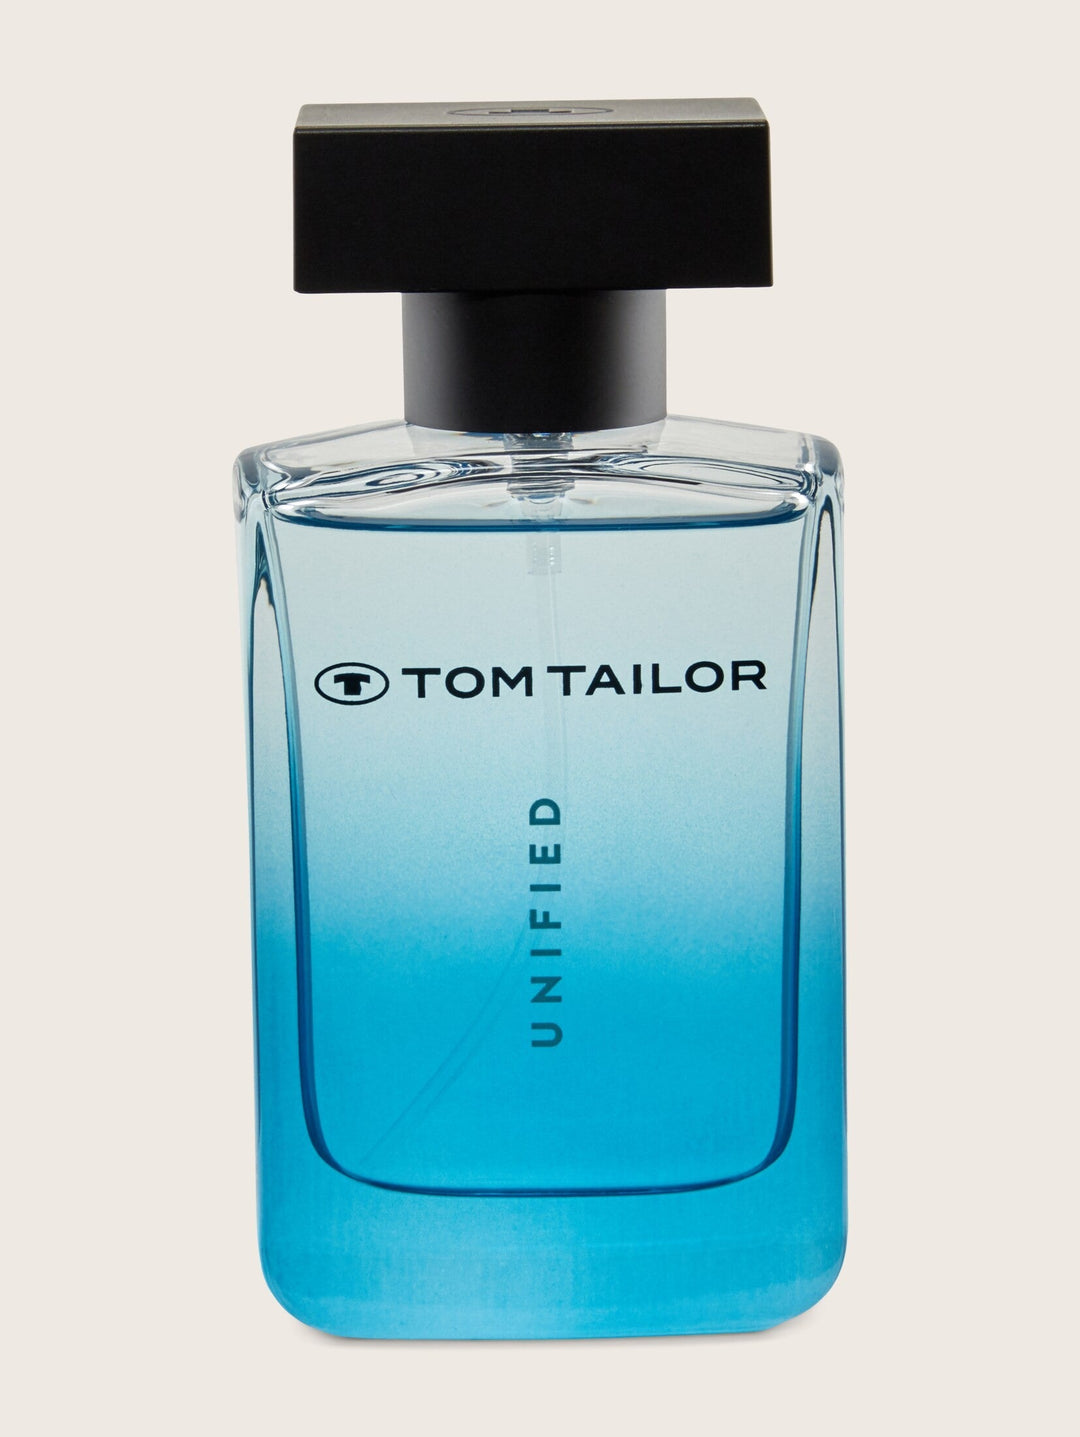 TOM TAILOR EDT UNIFIED – Square MAN Deal 50ML